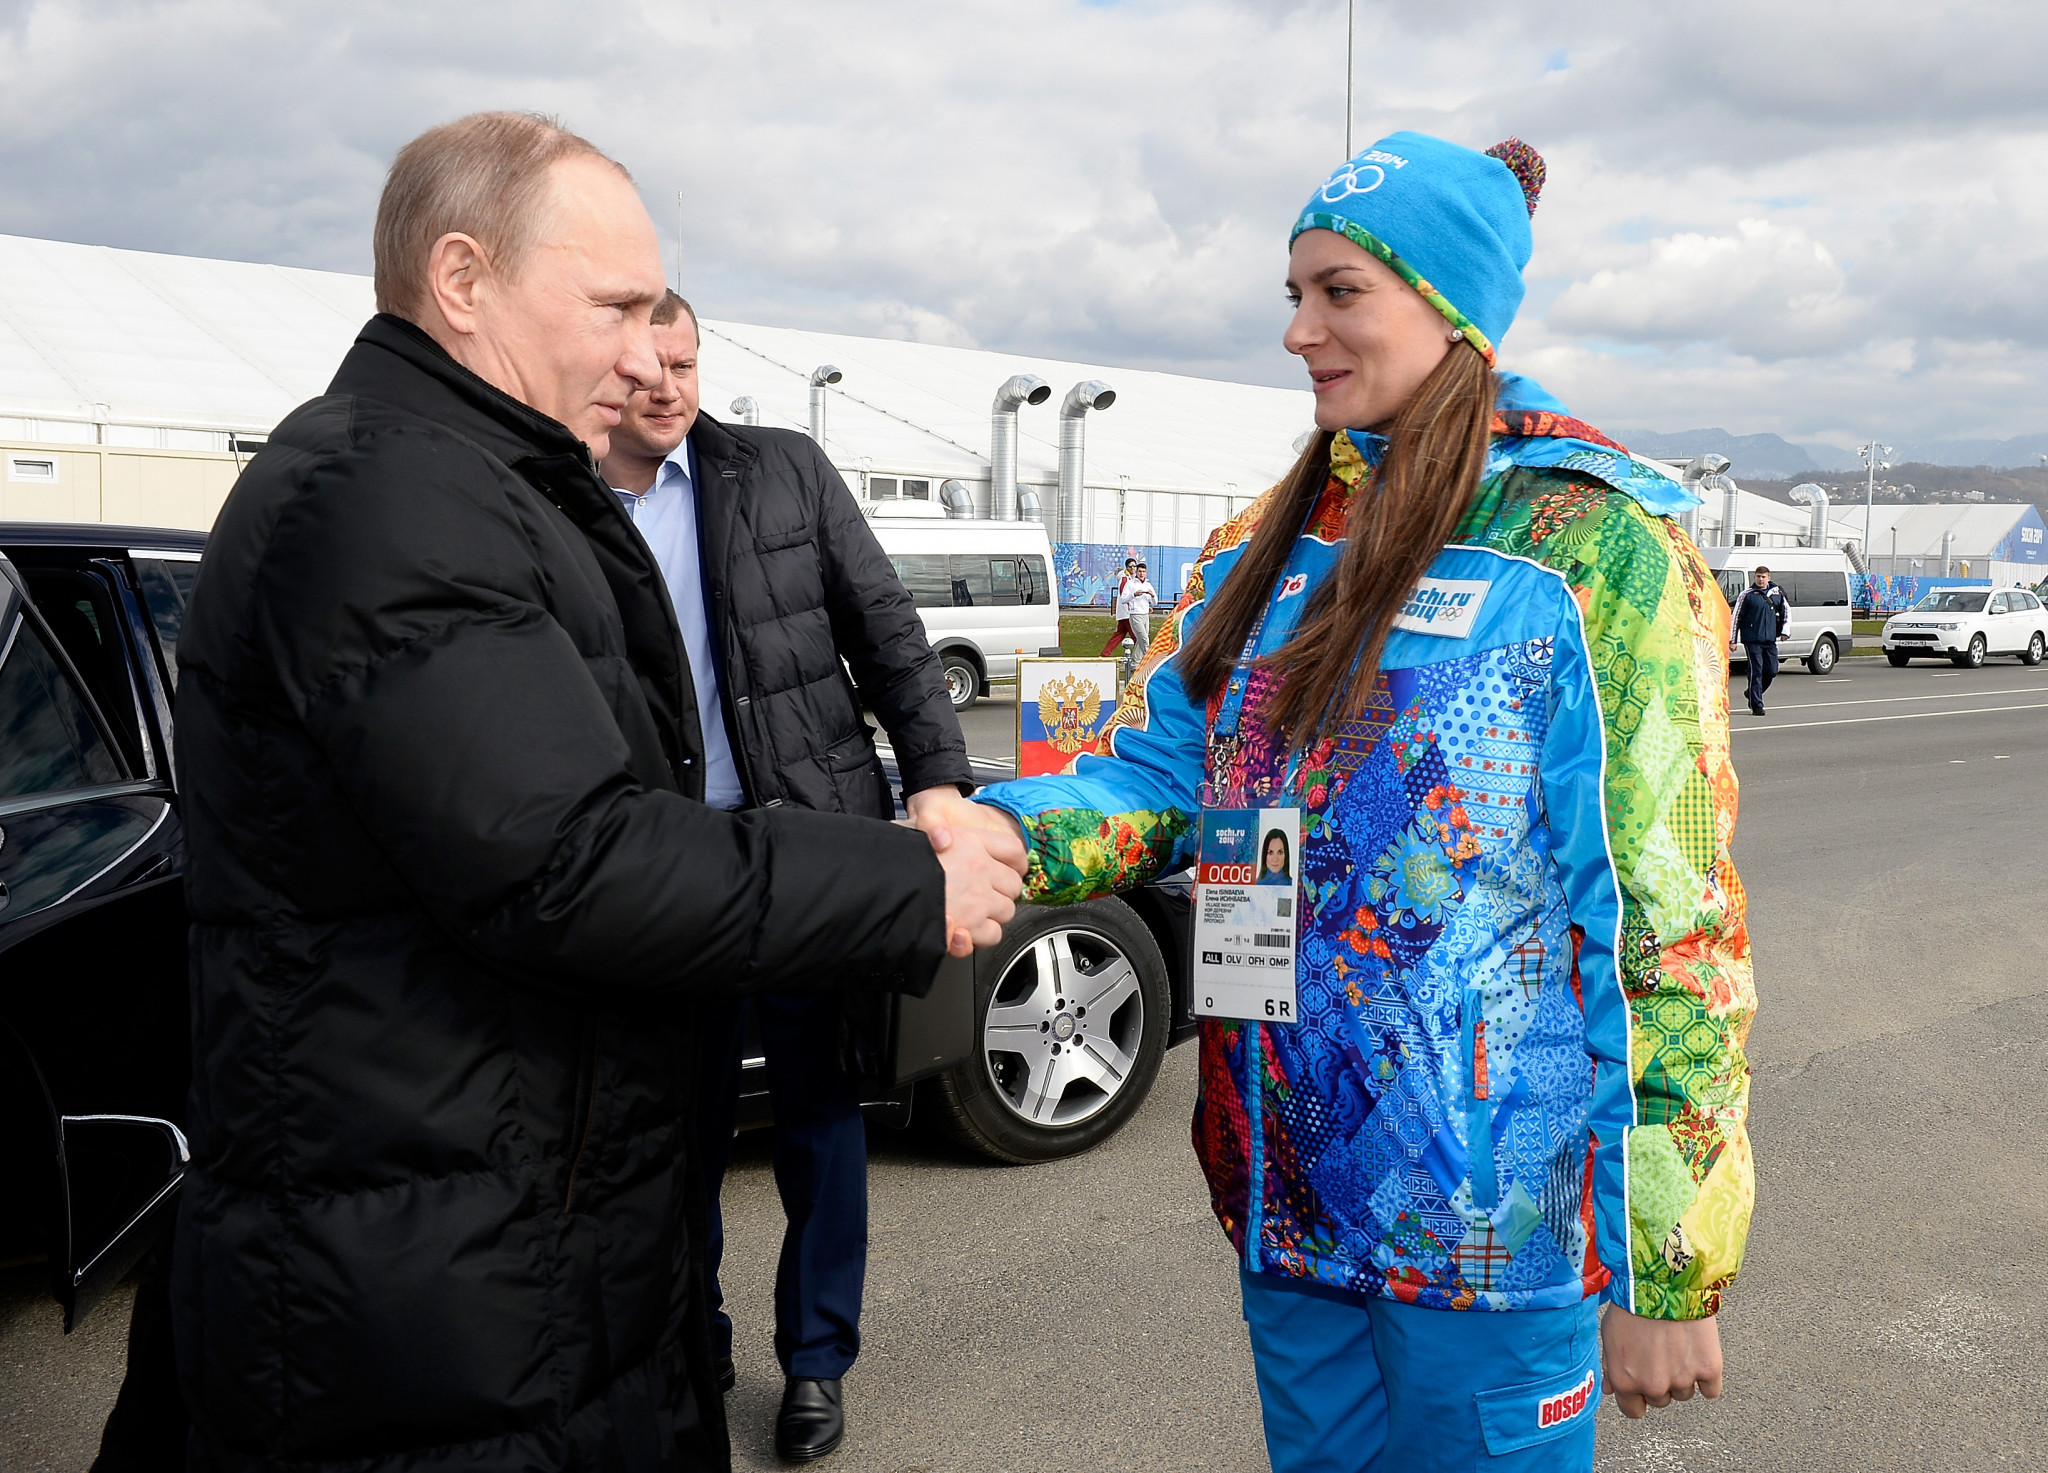 Yelena Isinbayeva, right, pictured with Russian President Vladimir Putin in 2014, has been sanctioned by the Ukrainian Government ©Getty Images